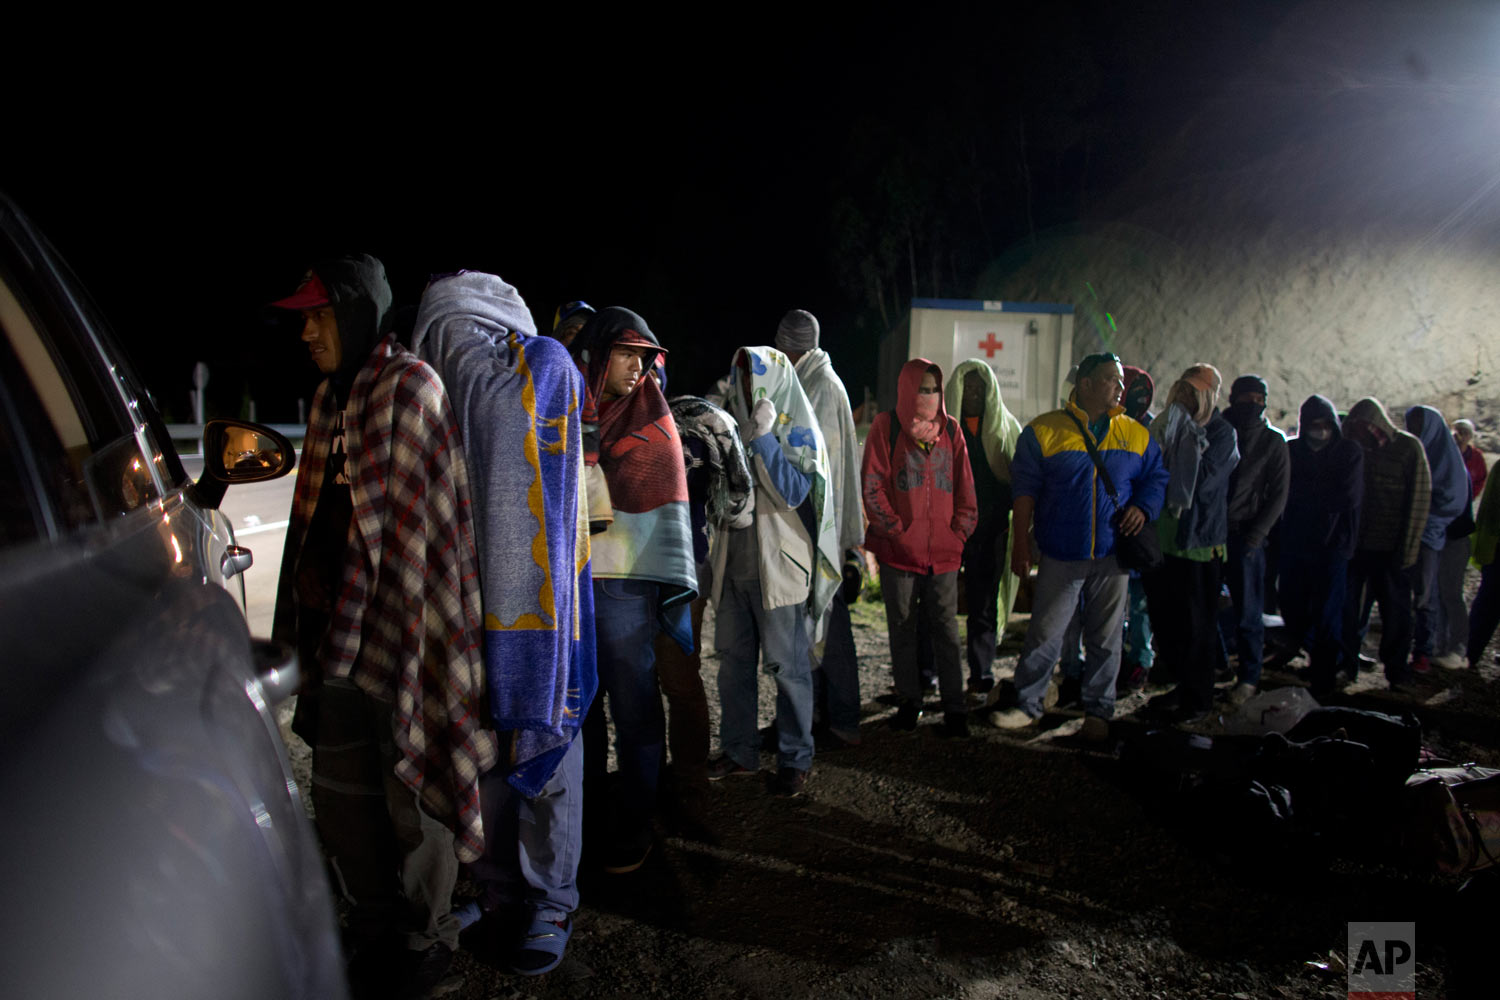  In this Aug. 31, 2018 photo, Venezuelan migrants line up for free bread and coffee, donated by a Colombian family from their car, at a gas station in Pamplona, Colombia. Millions have fled Venezuela’s deadly shortages and spiraling hyperinflation in